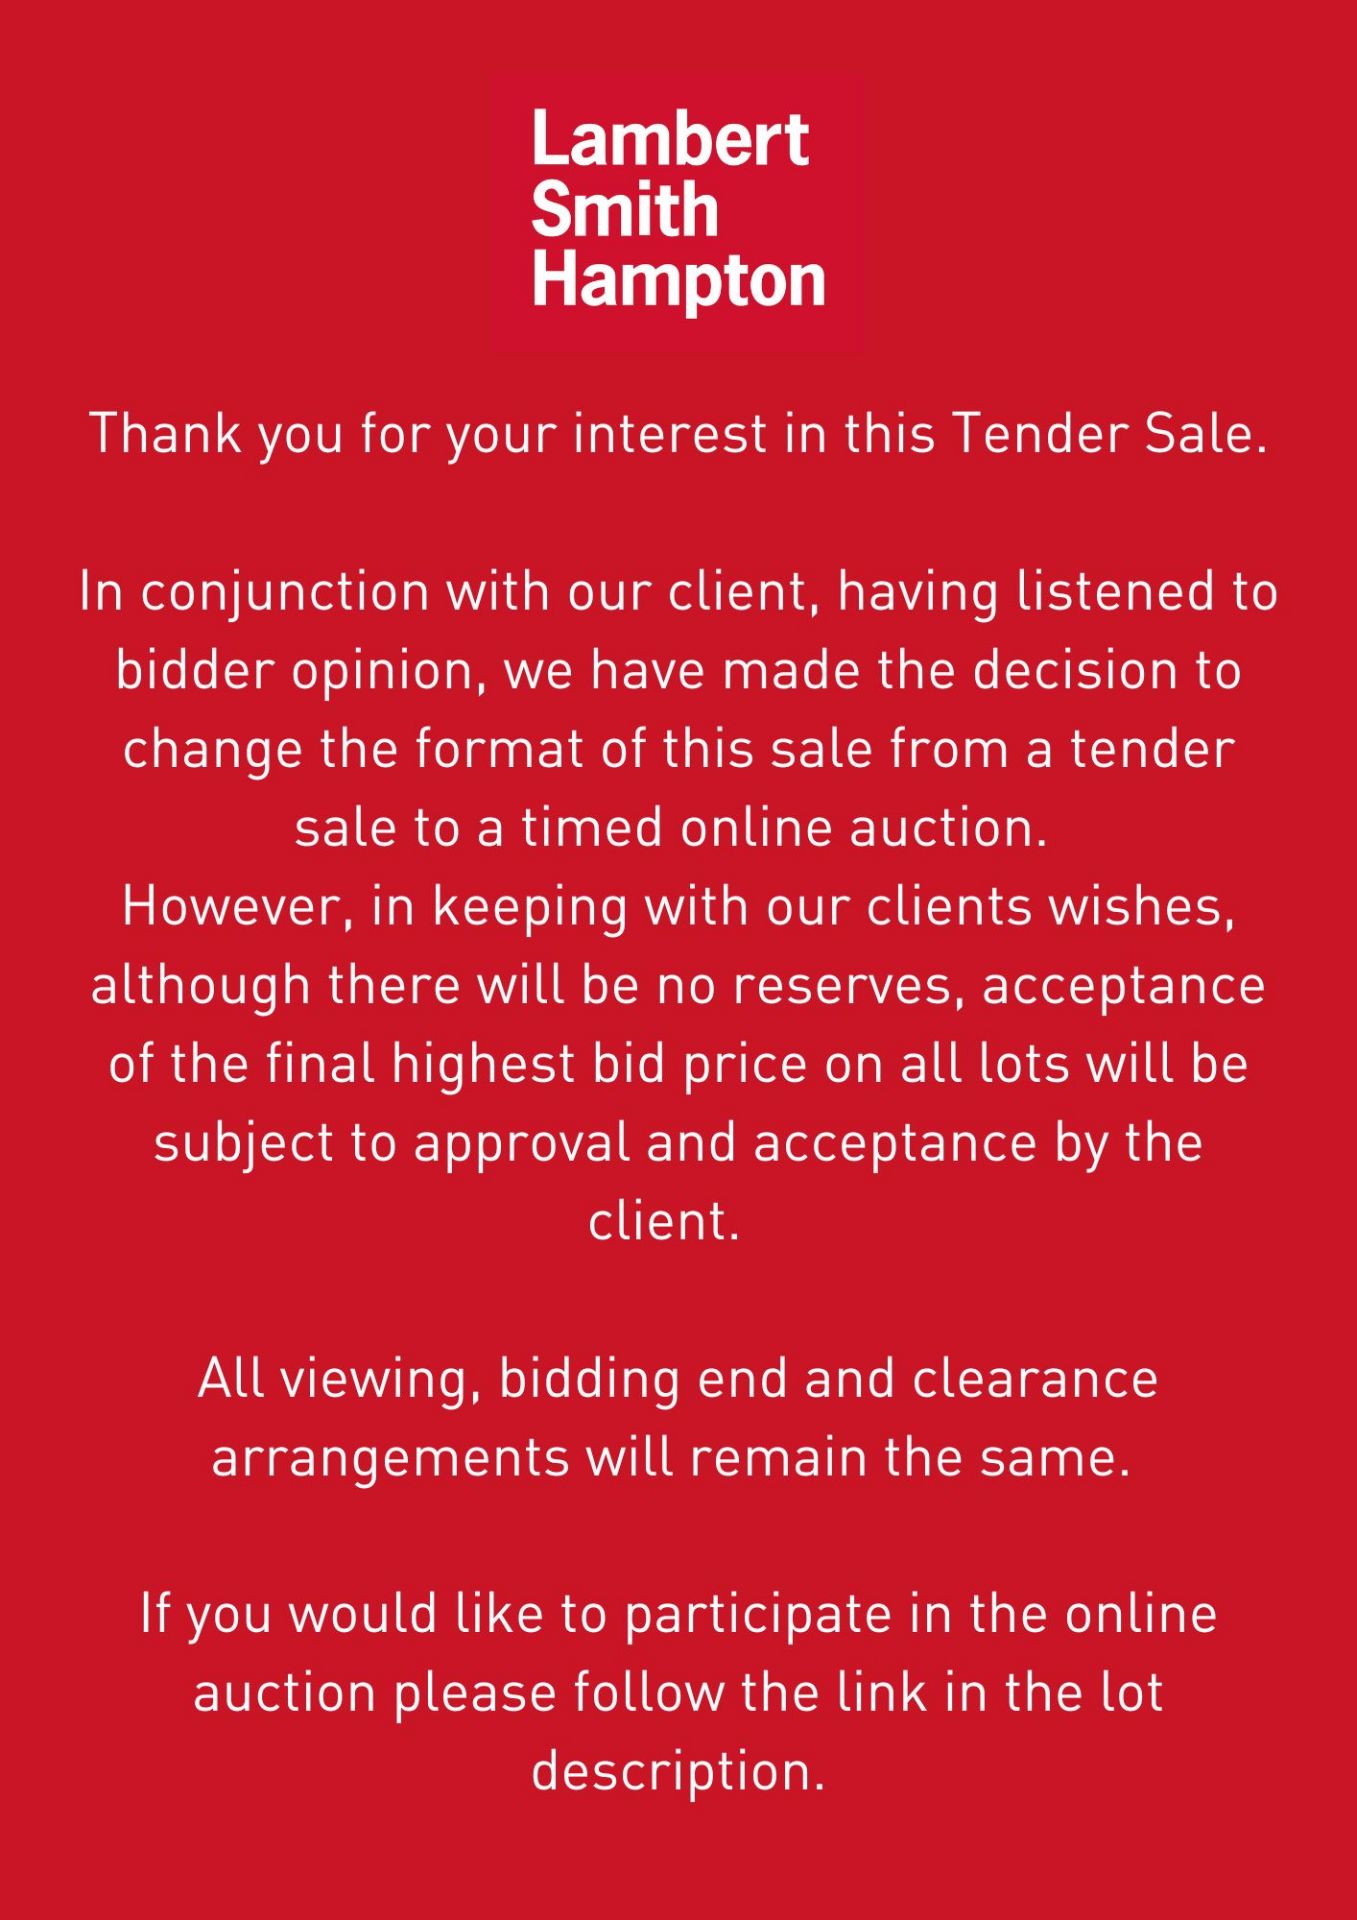 Thank you for your interest in this Tender Sale.